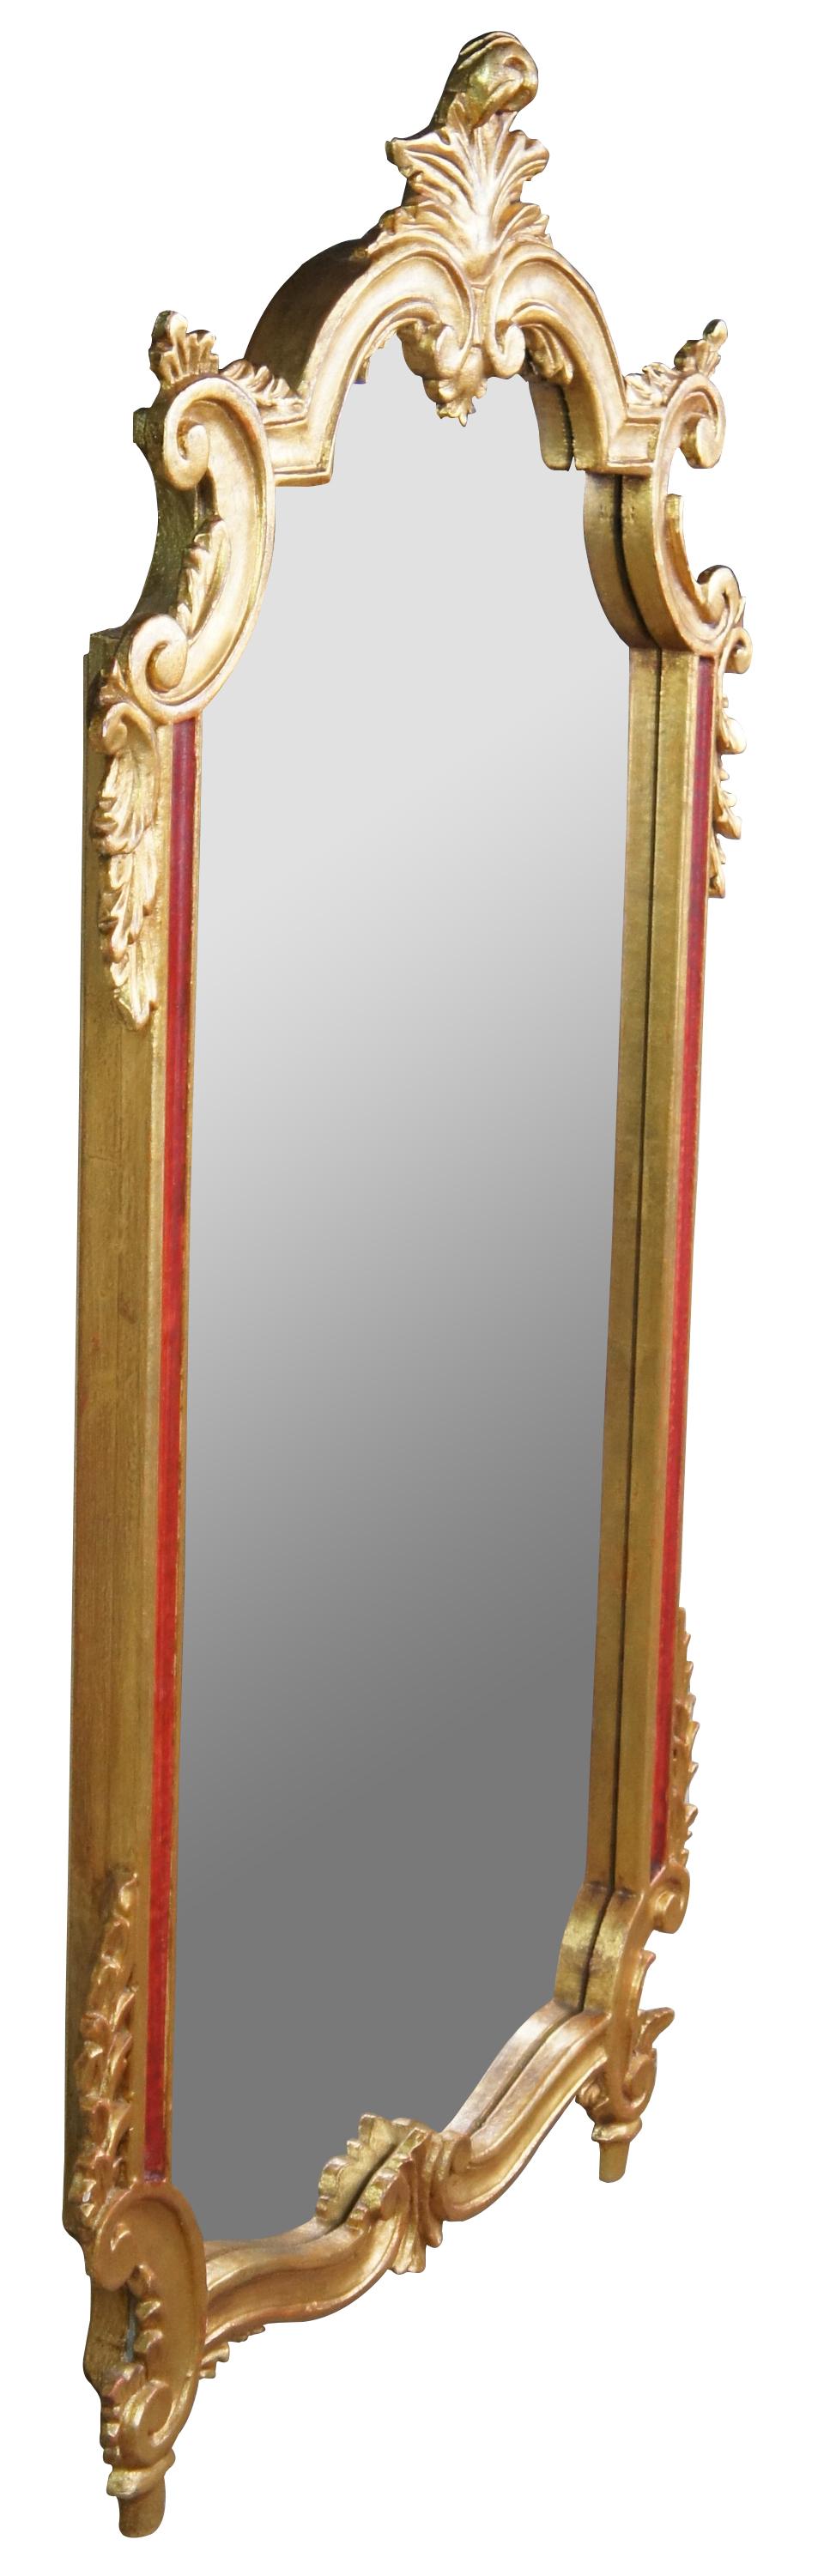 Vintage Italian Neoclassical wall vanity mirror featuring gilt wood with red accents and ornate acanthus motif. Made in Italy. Measures: 44